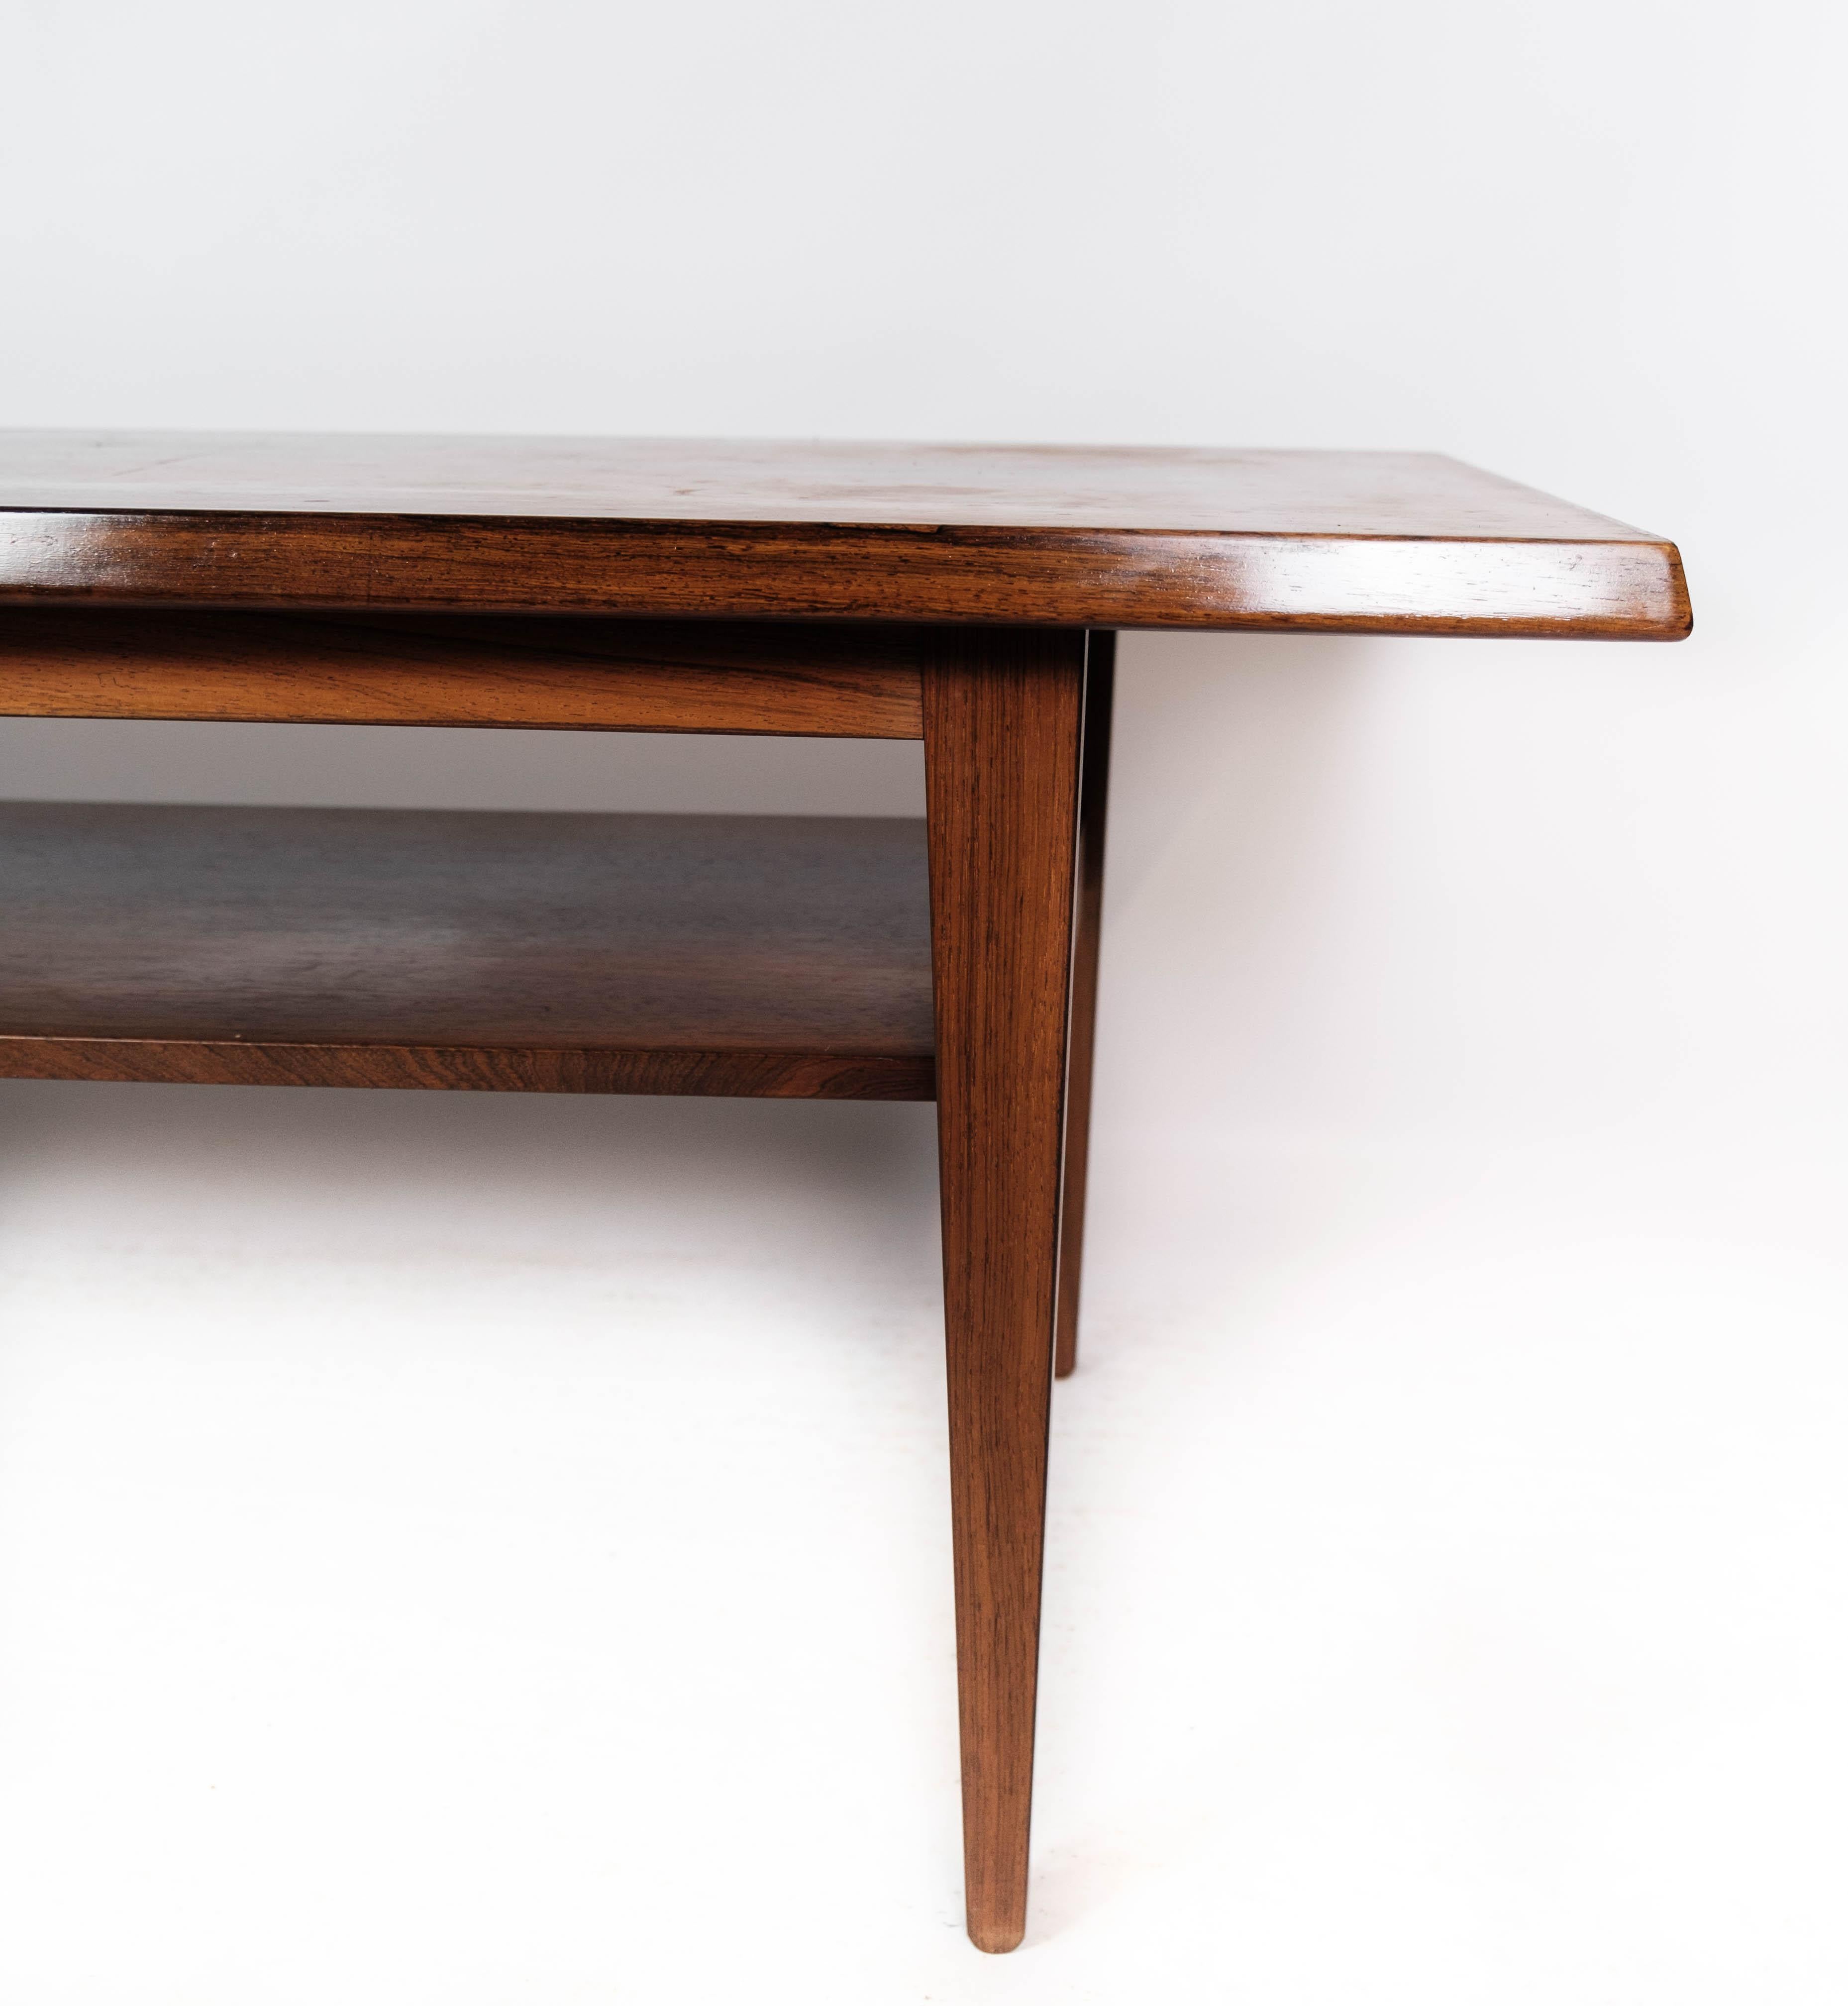 The coffee table crafted from rosewood with a shelf underneath the tabletop is a quintessential example of Danish design from the 1960s. Combining form and function with elegant simplicity, this piece embodies the principles of mid-century modern